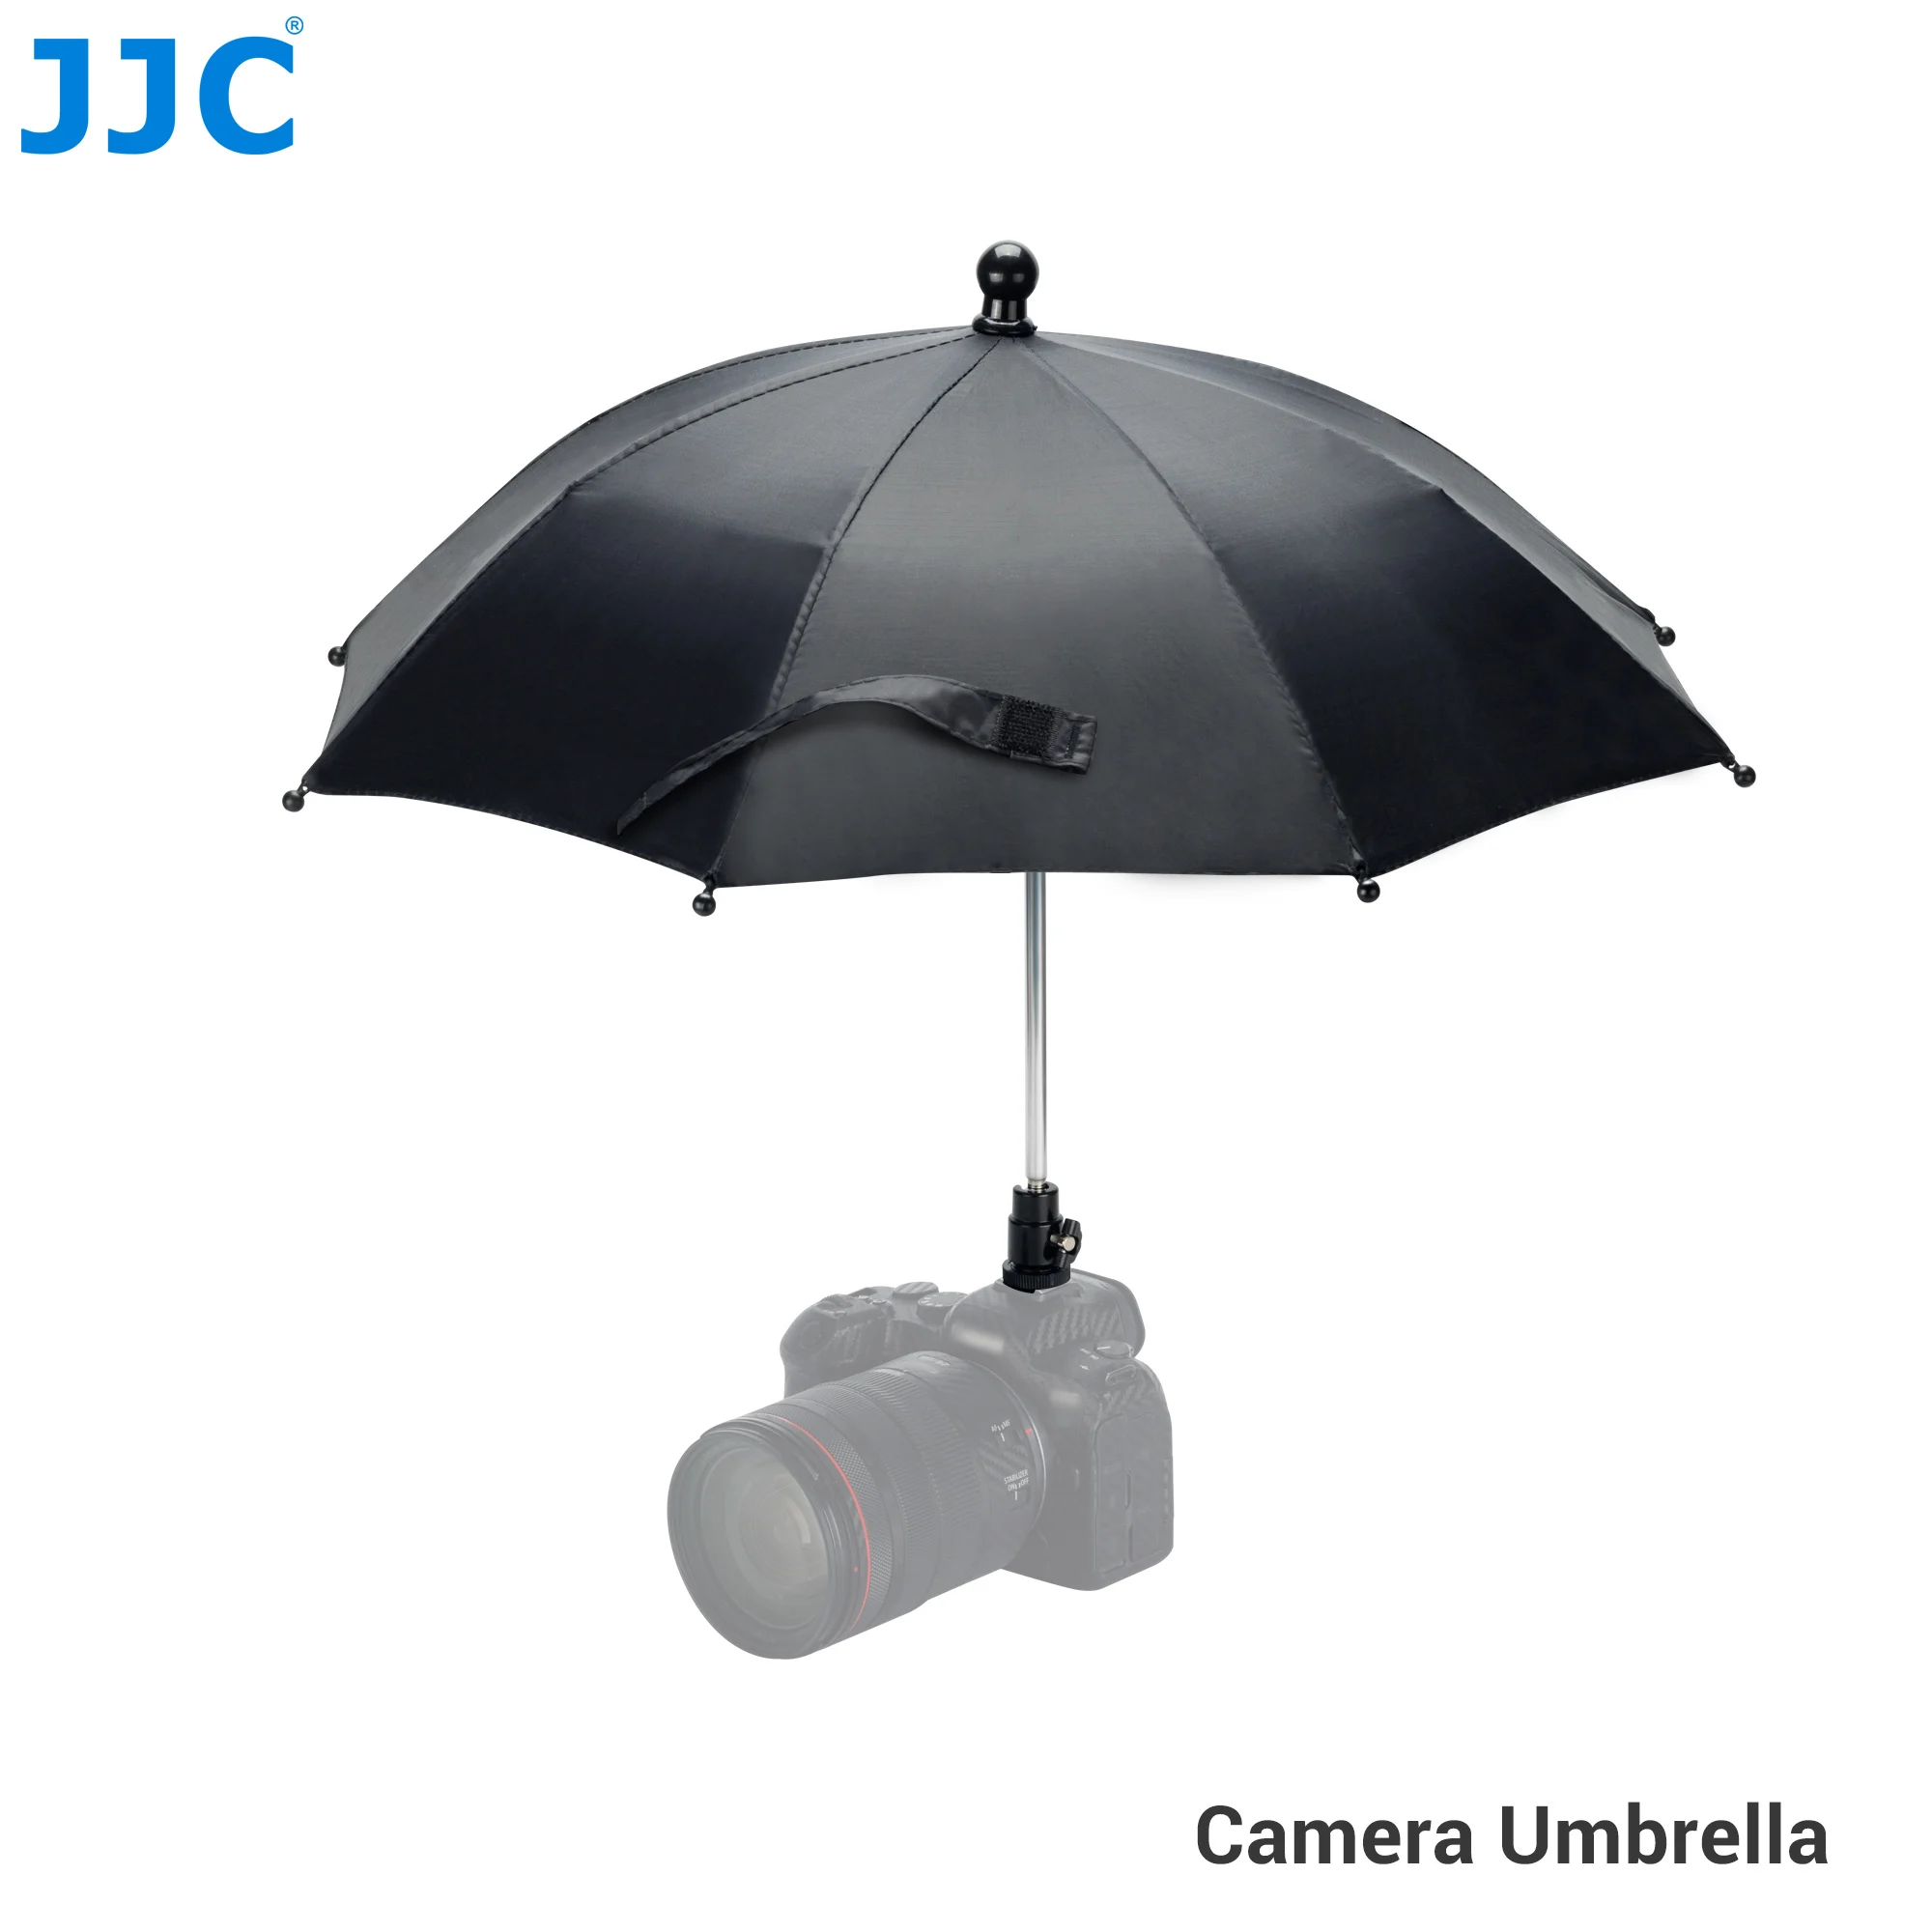 NEW Hands-free holder sunshade Umbrella Bracket backpack Support for camera  photography travel Vlog outdoor rainy accessories